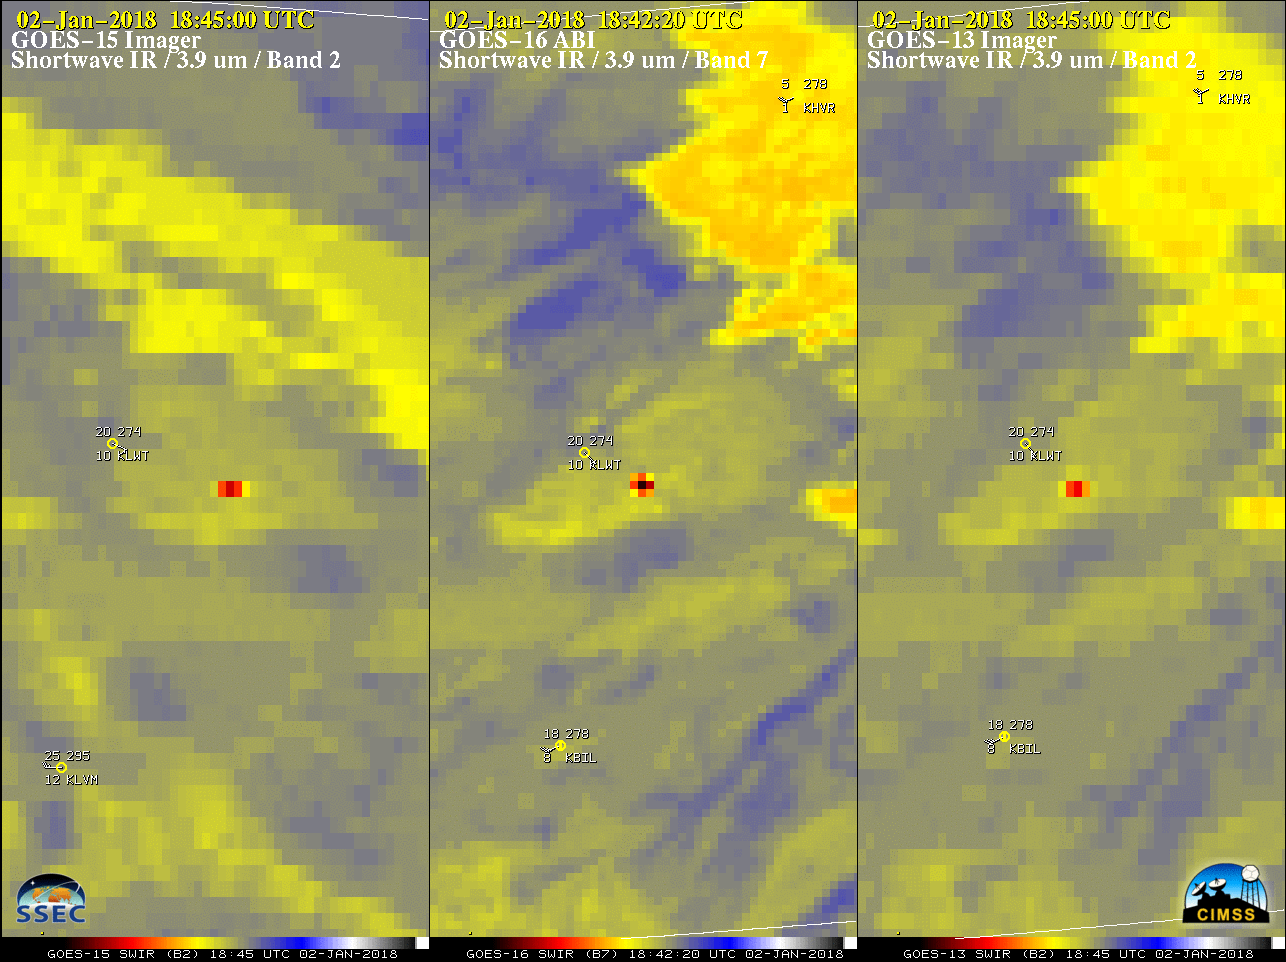 GOES-15 (left), GOES-16 (center) and GOES-13 (right) Shortwave Infrared (3.9 µm) images, with plots of hourly surface reports [click to play MP4 animation]